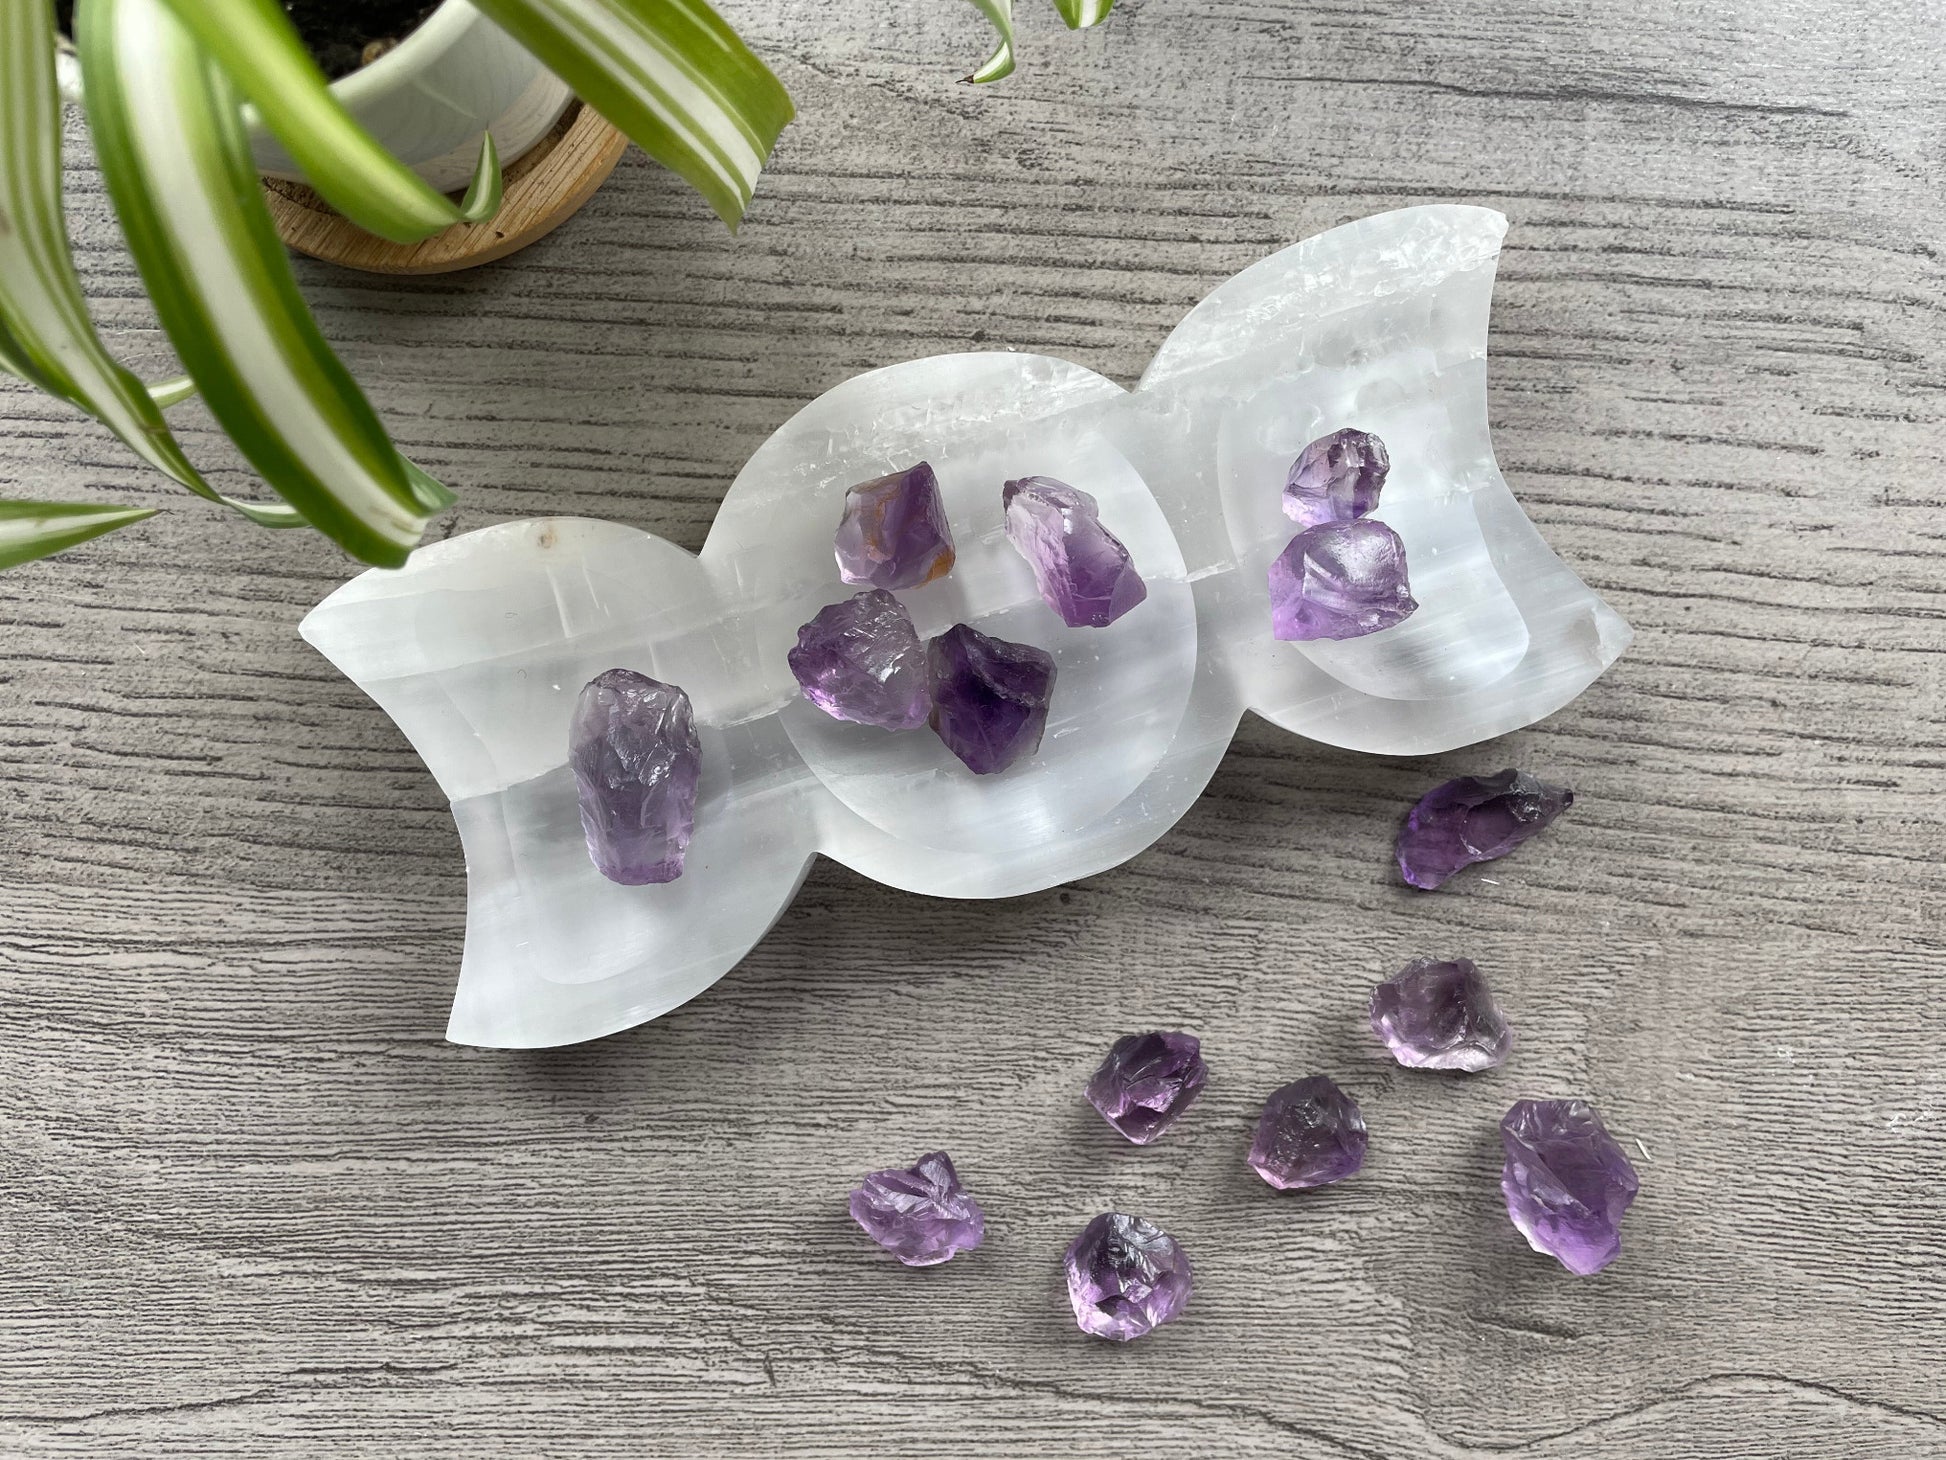 Pictured are pieces of raw amethyst.